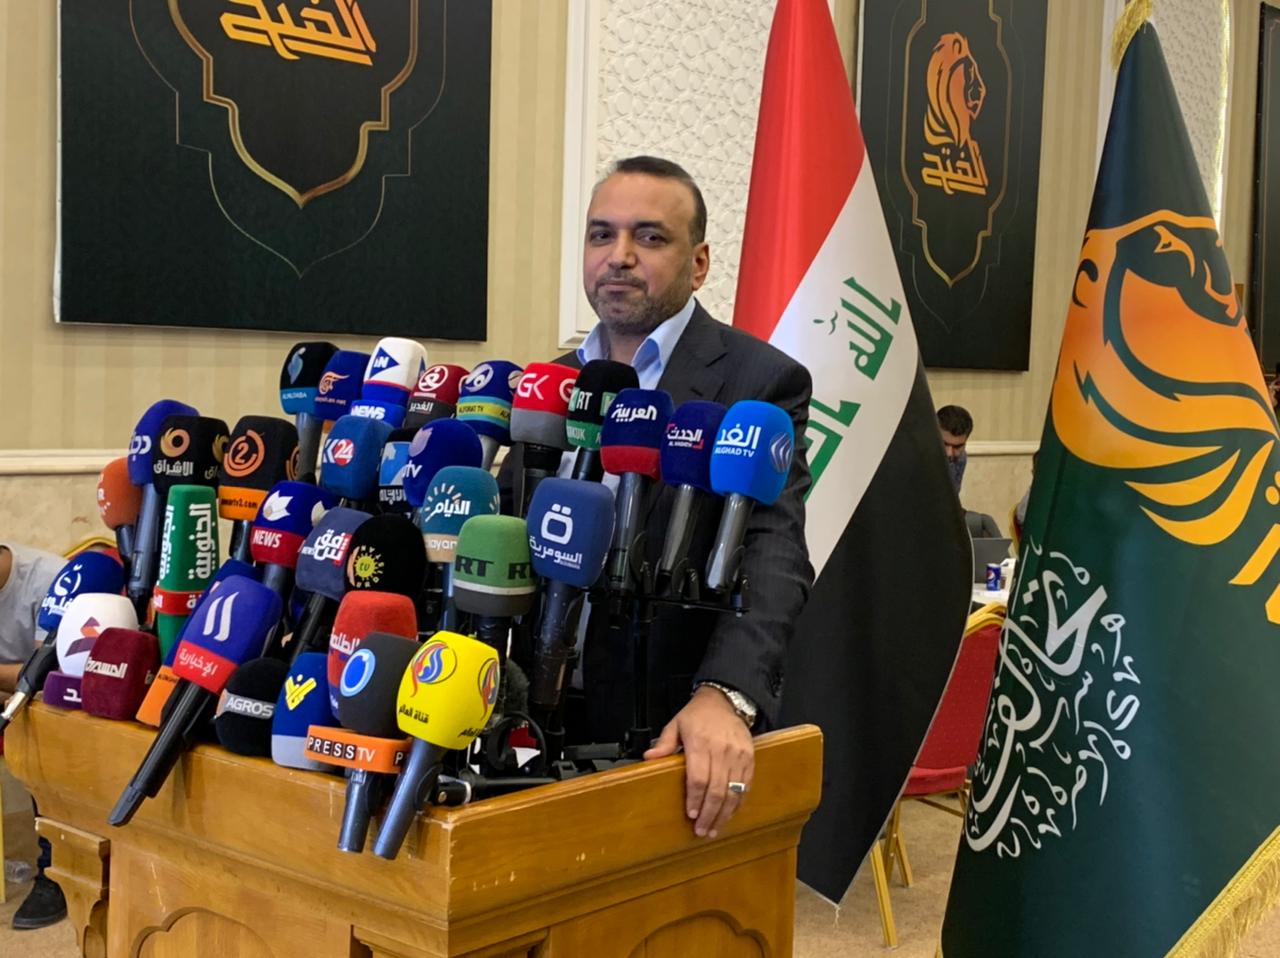 Al-Fatah casts doubts about the integrity of the election; hints at a possible coalition with al-Sadr